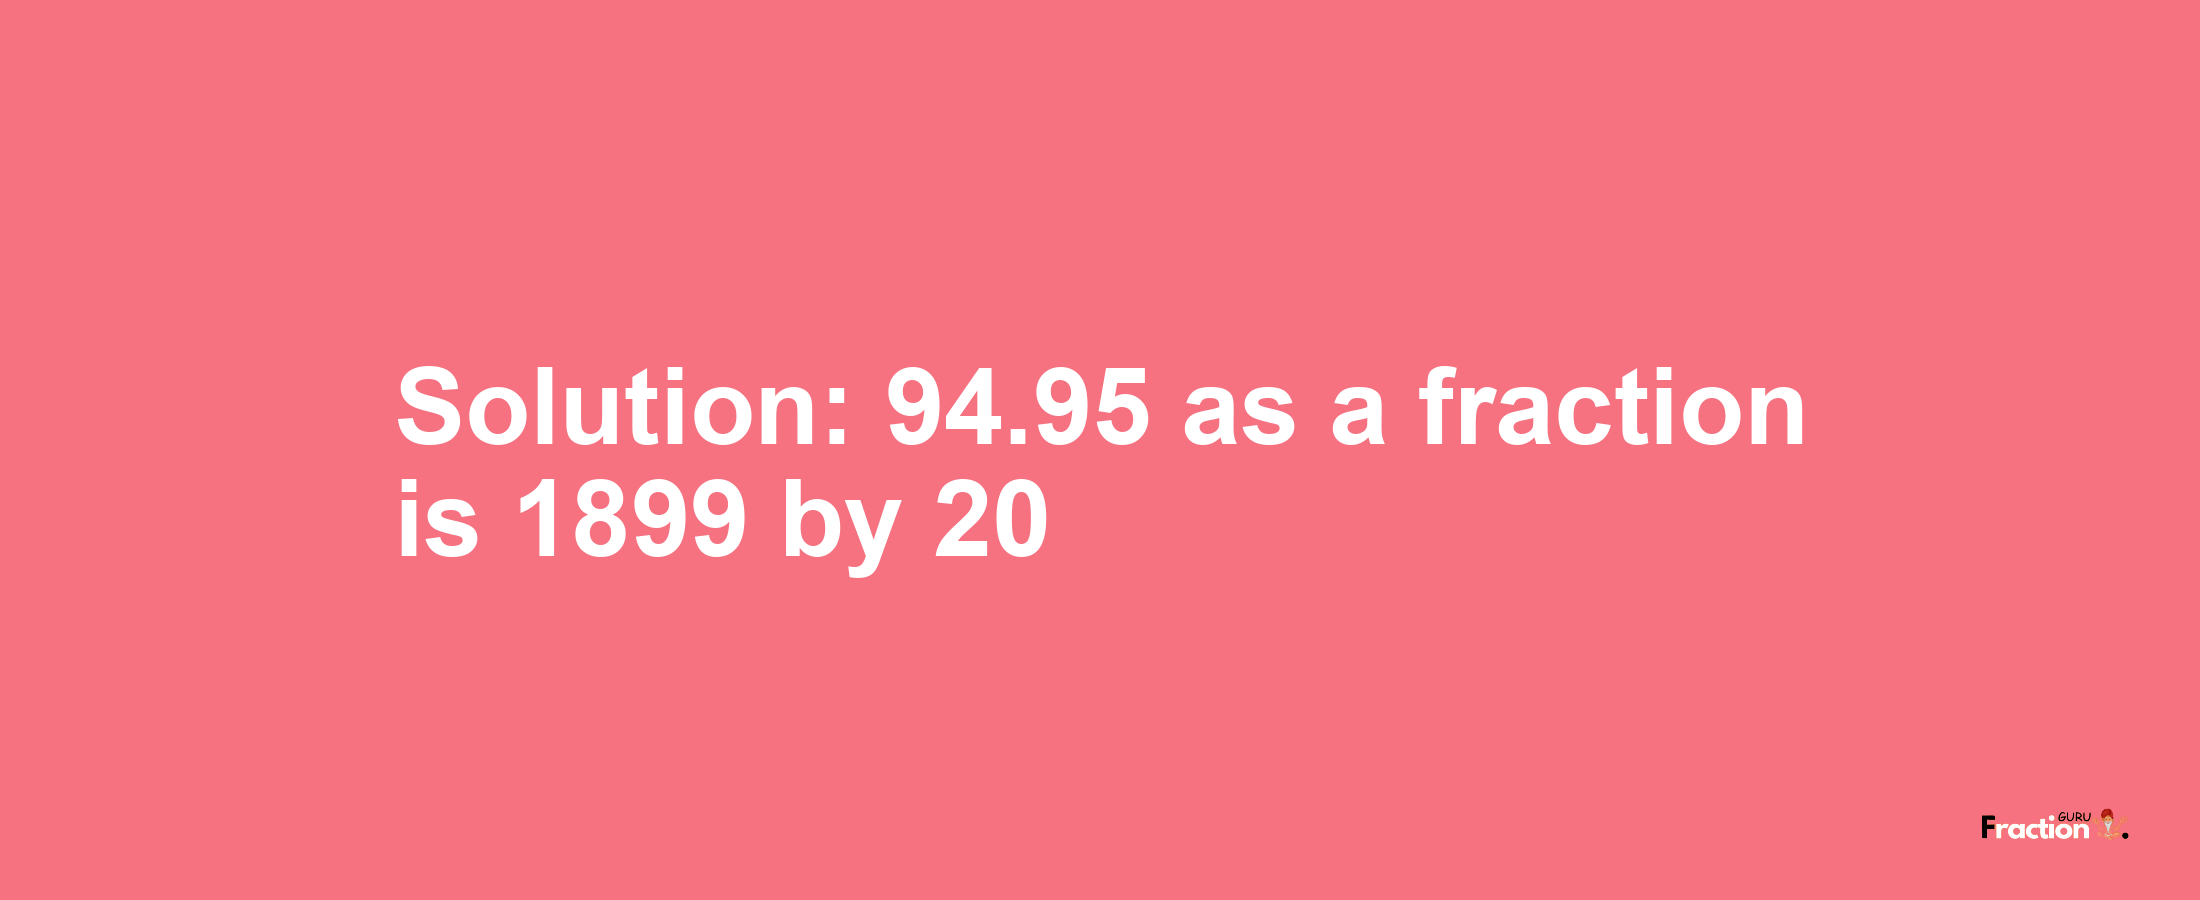 Solution:94.95 as a fraction is 1899/20